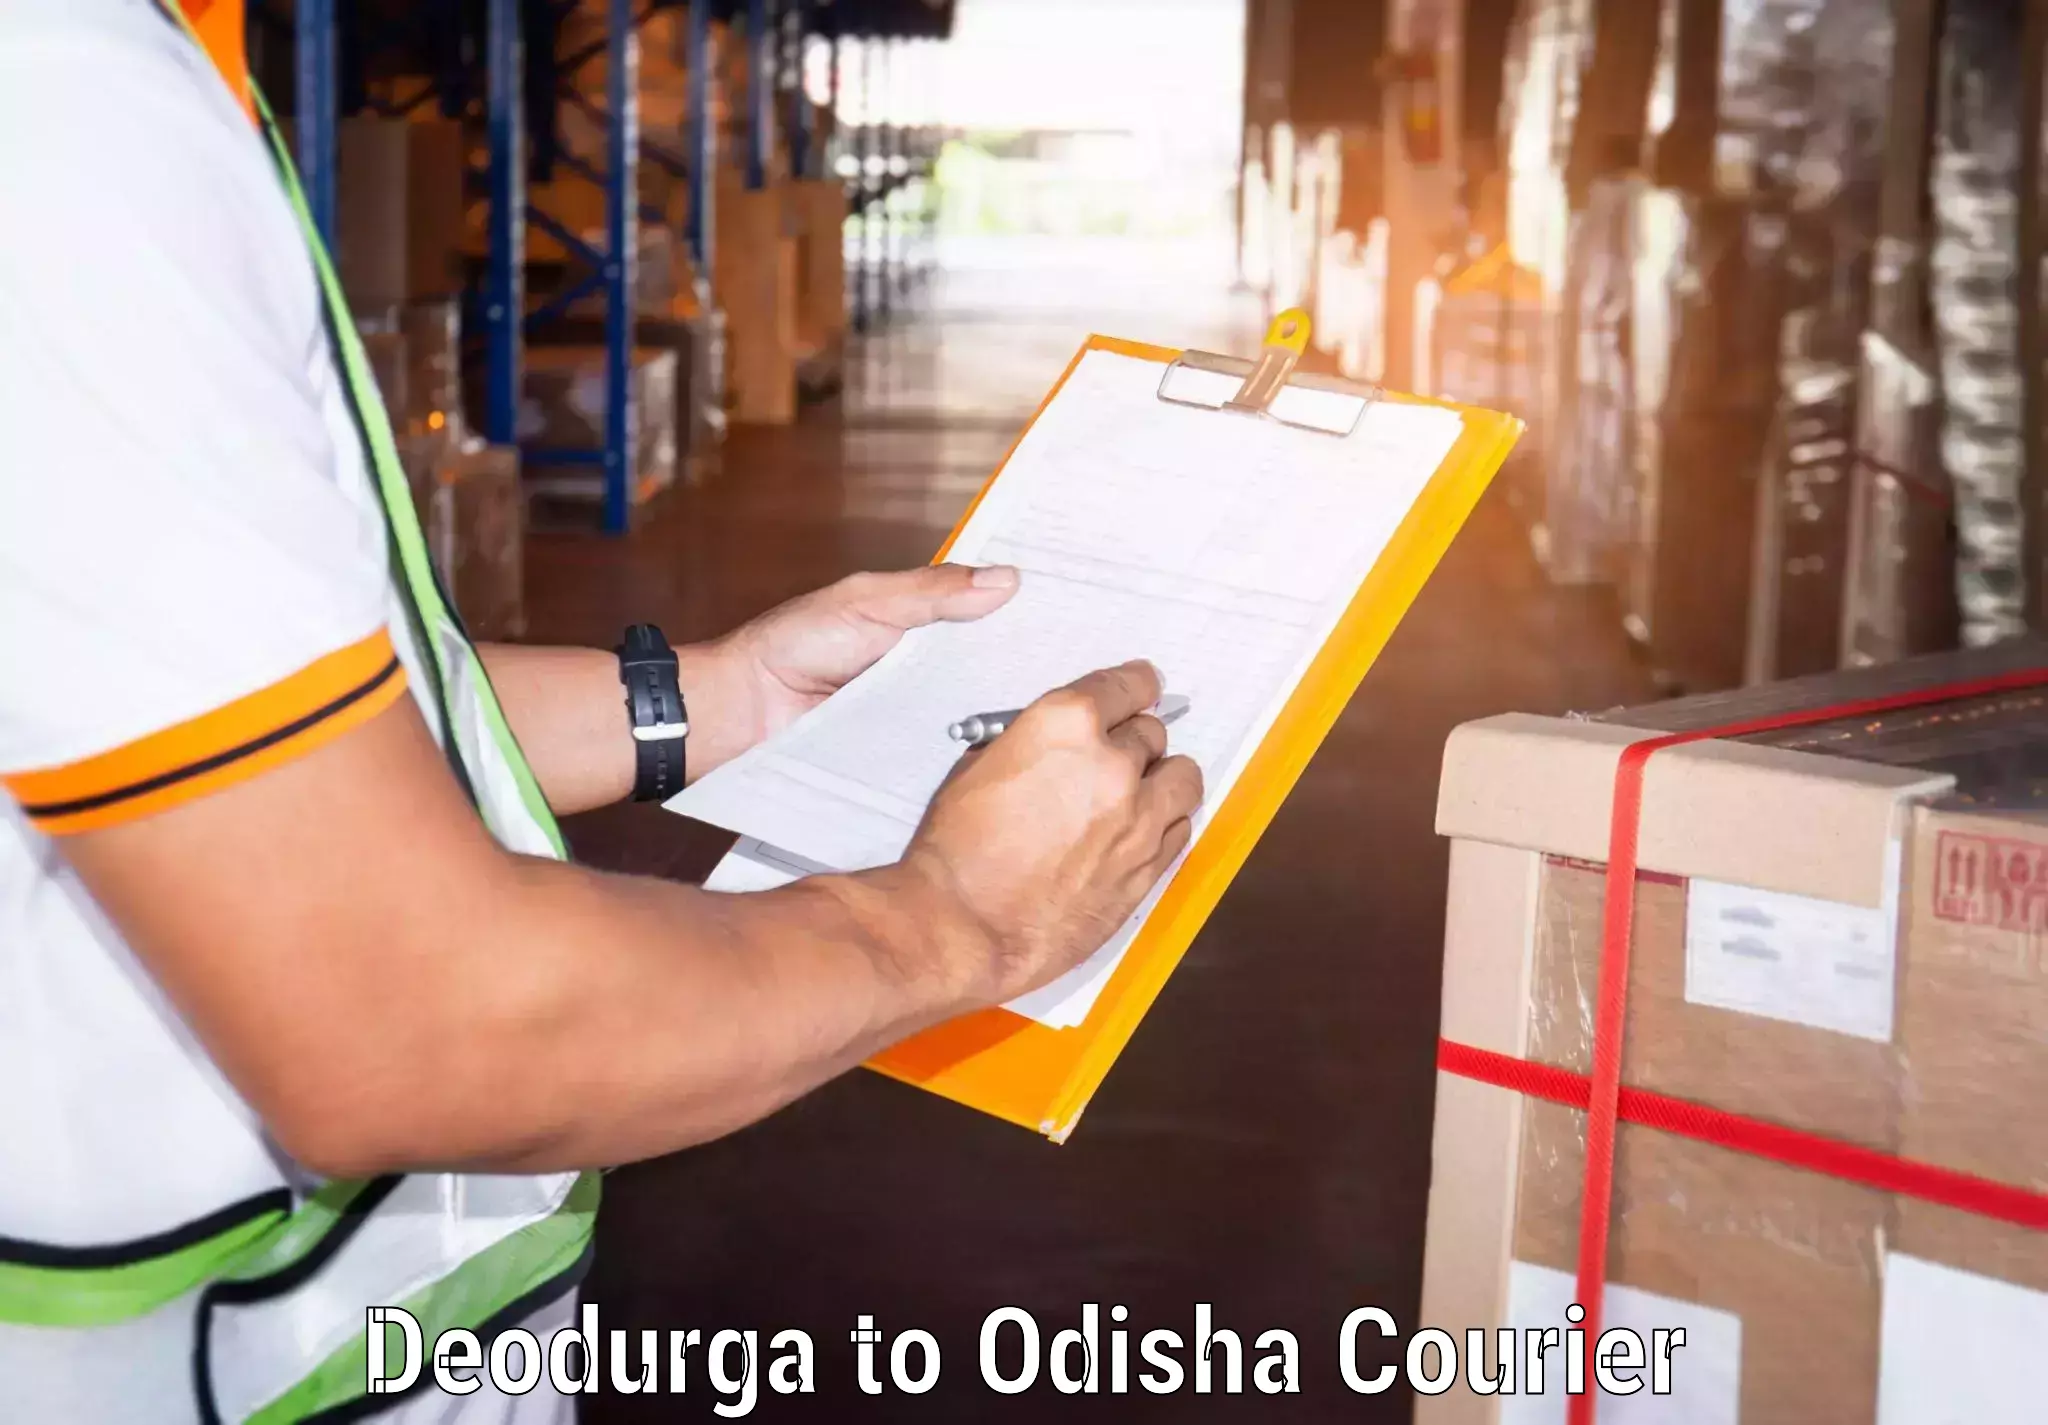 Parcel handling and care in Deodurga to Puri